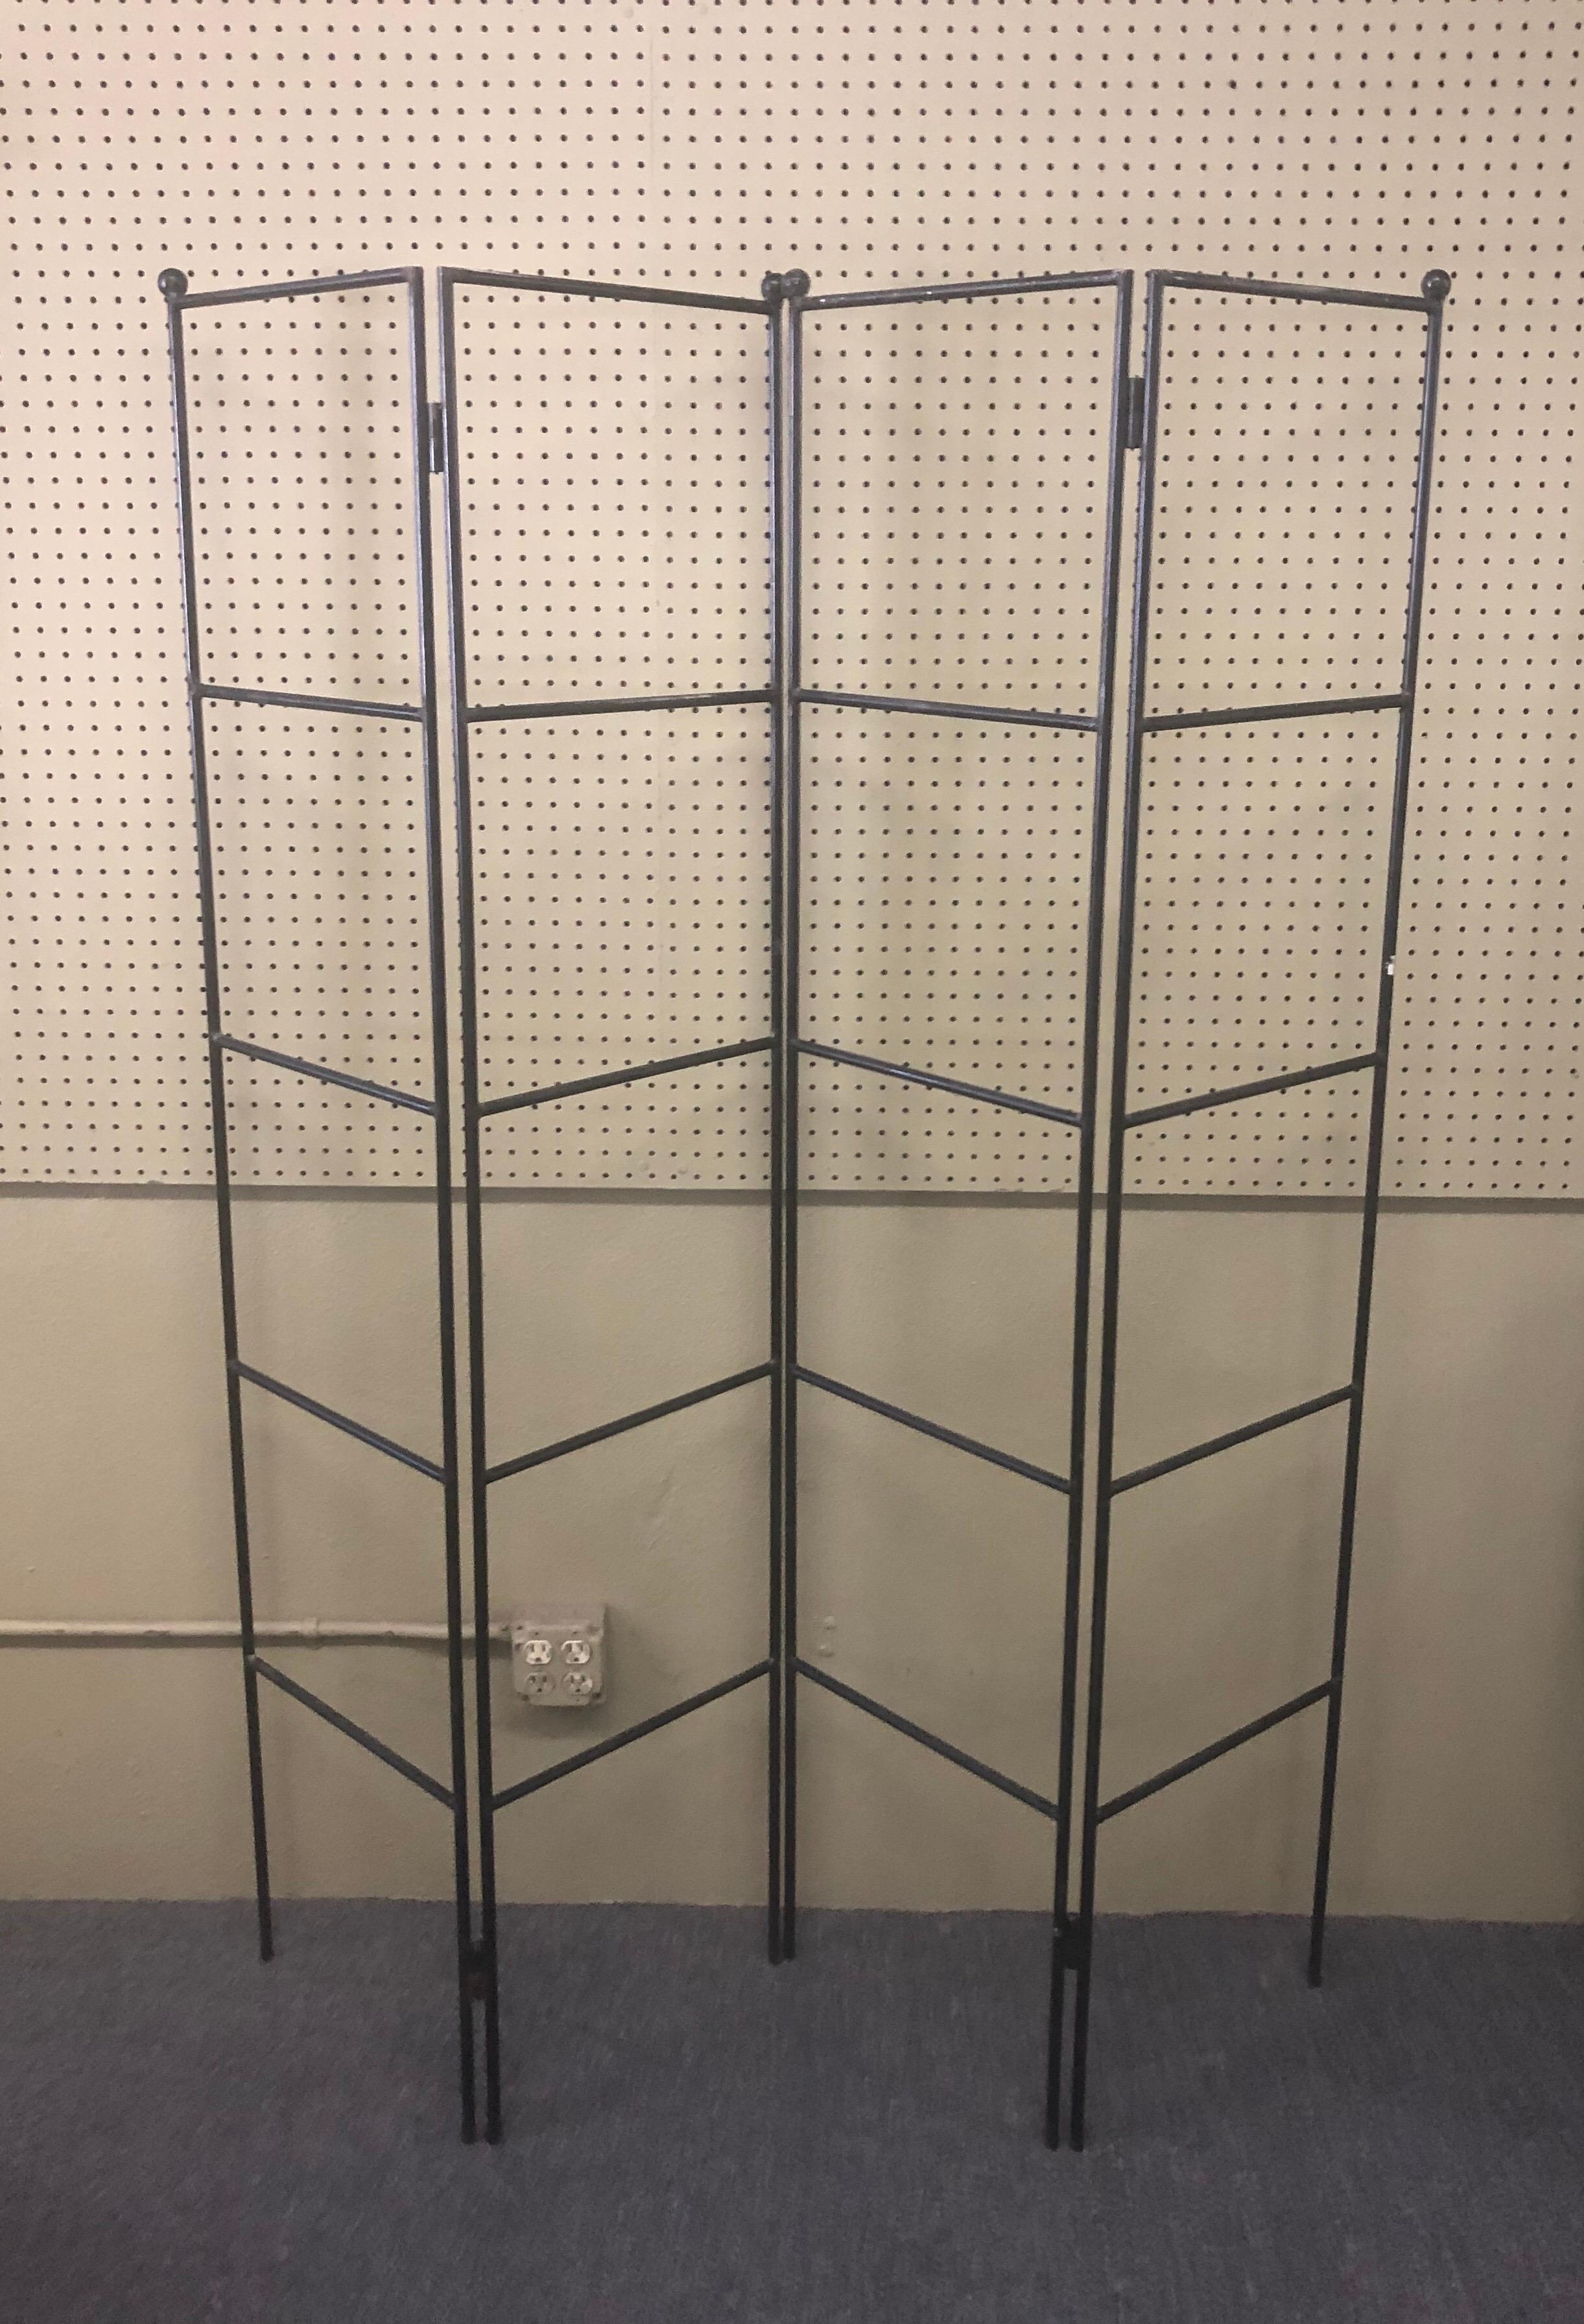 A very cool and simple Minimalist four-panel wrought iron room divider / screen, circa 1970s. The screen is split into two pieces with two panels each and can be used separately or together. Each panel is 16